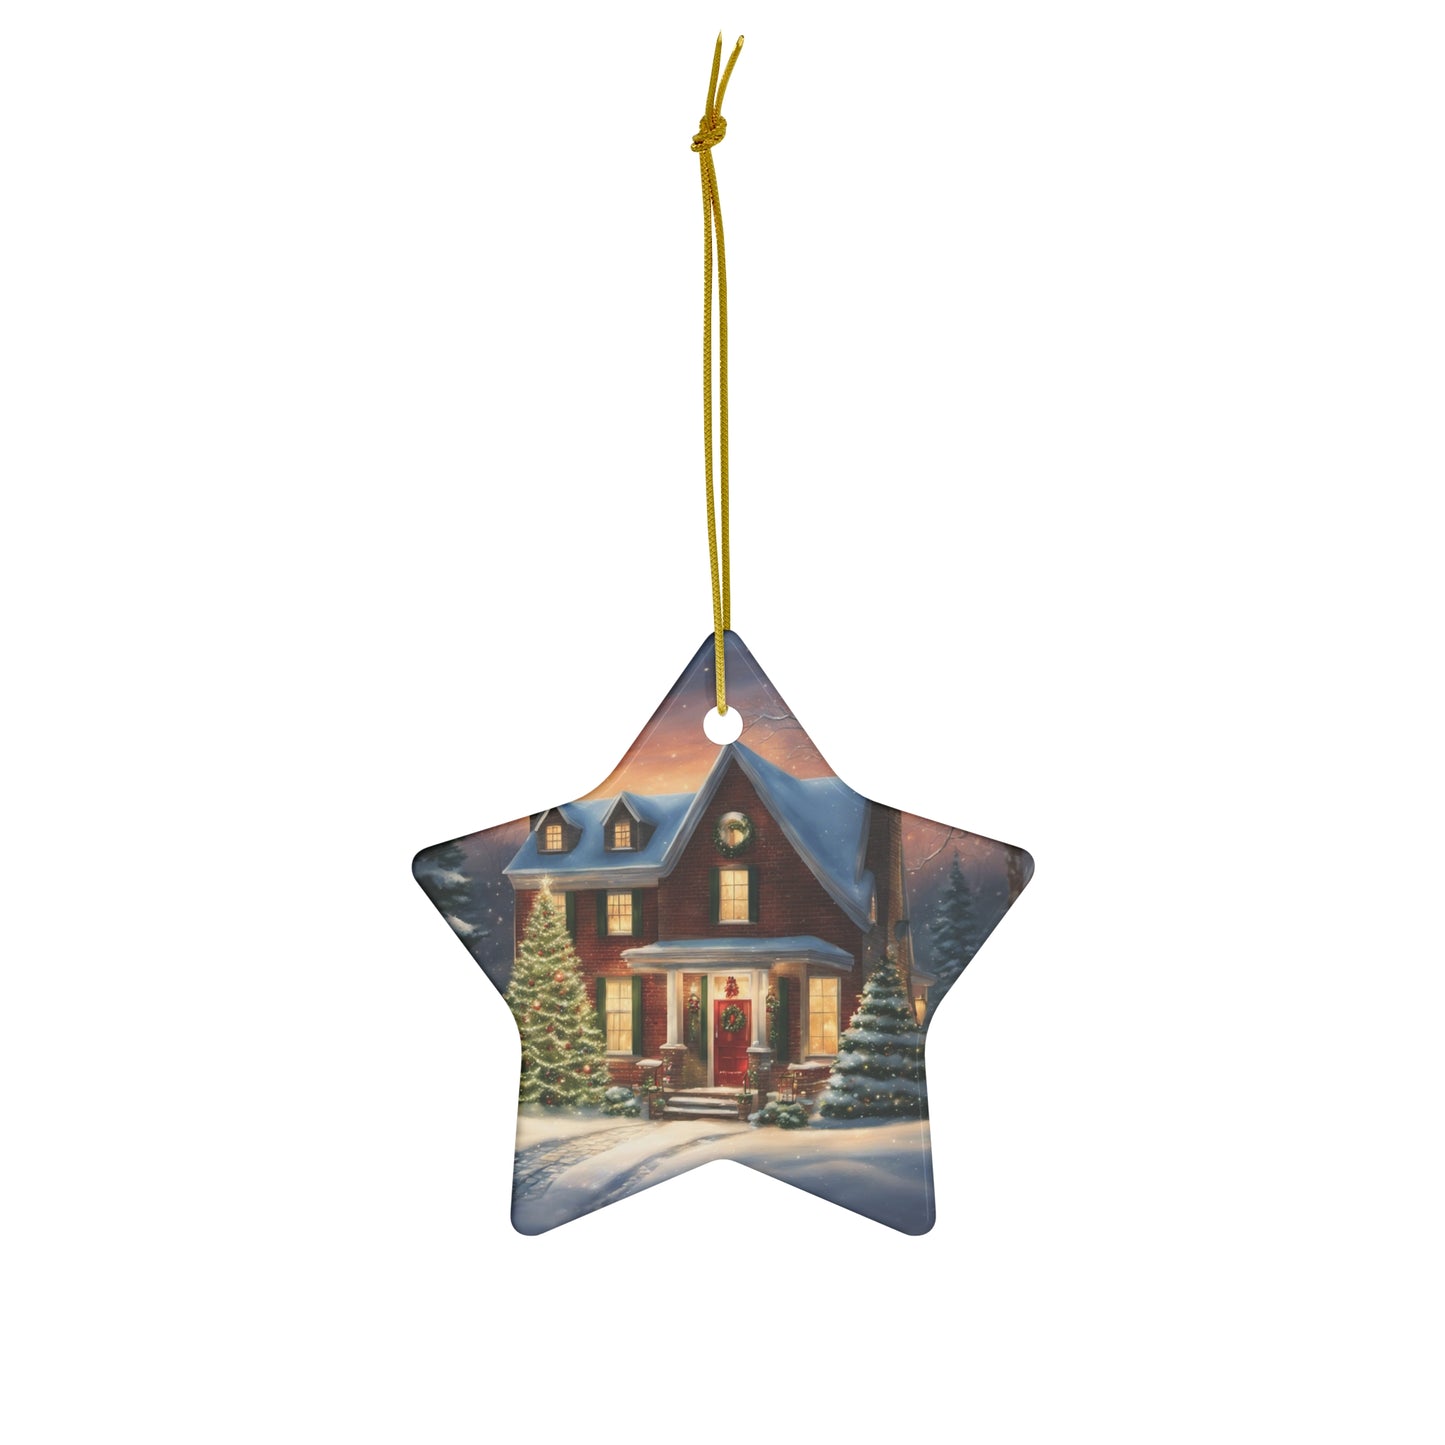 Child's Christmas Home in Dreams - Ceramic Ornament, 4 Shapes